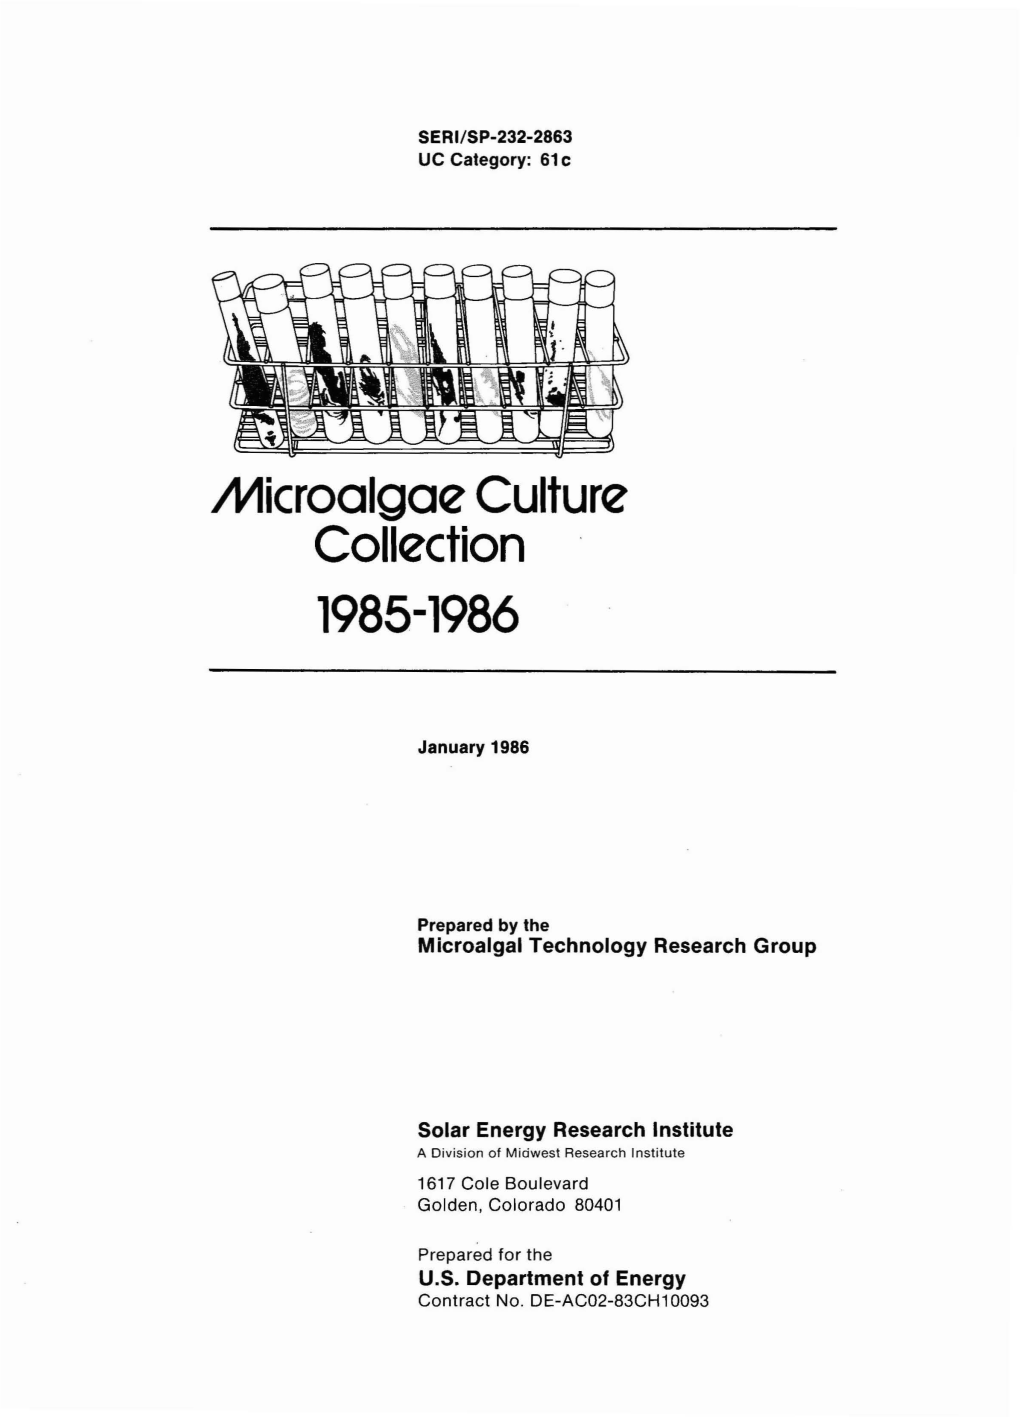 Microalgae Culture Collection 1985-1986